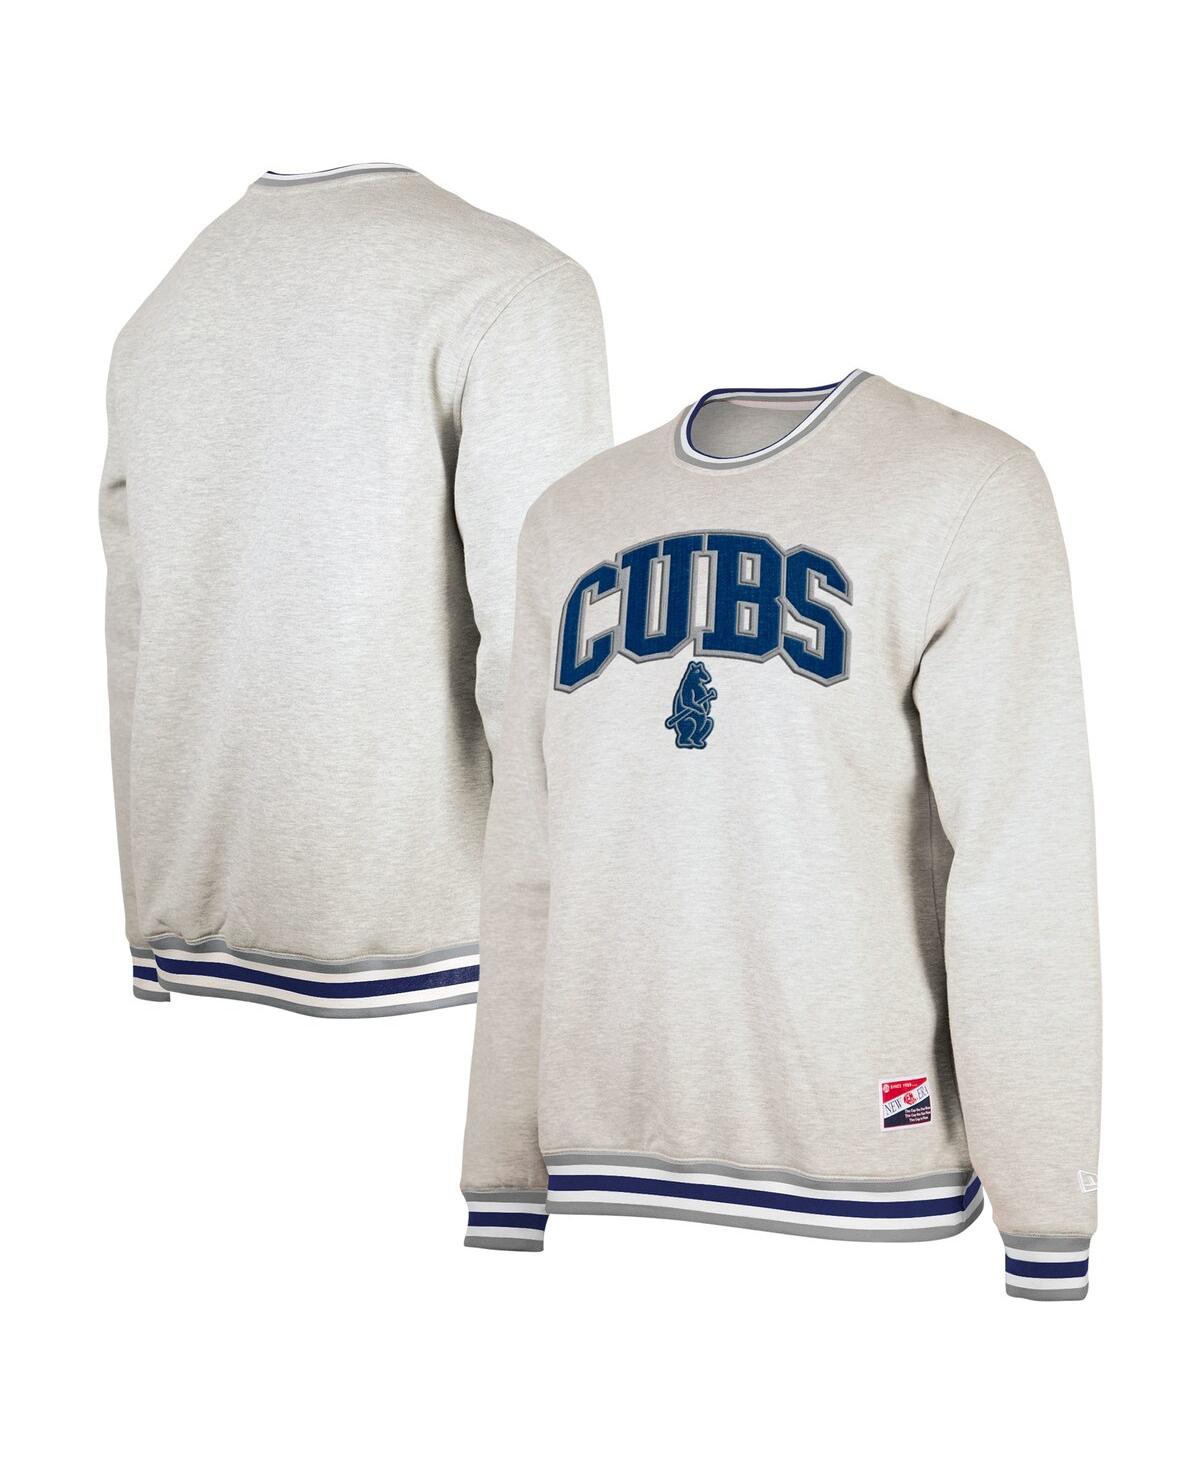 Men's Heather Gray Chicago Cubs Throwback Classic Pullover Sweatshirt - Heather Gr